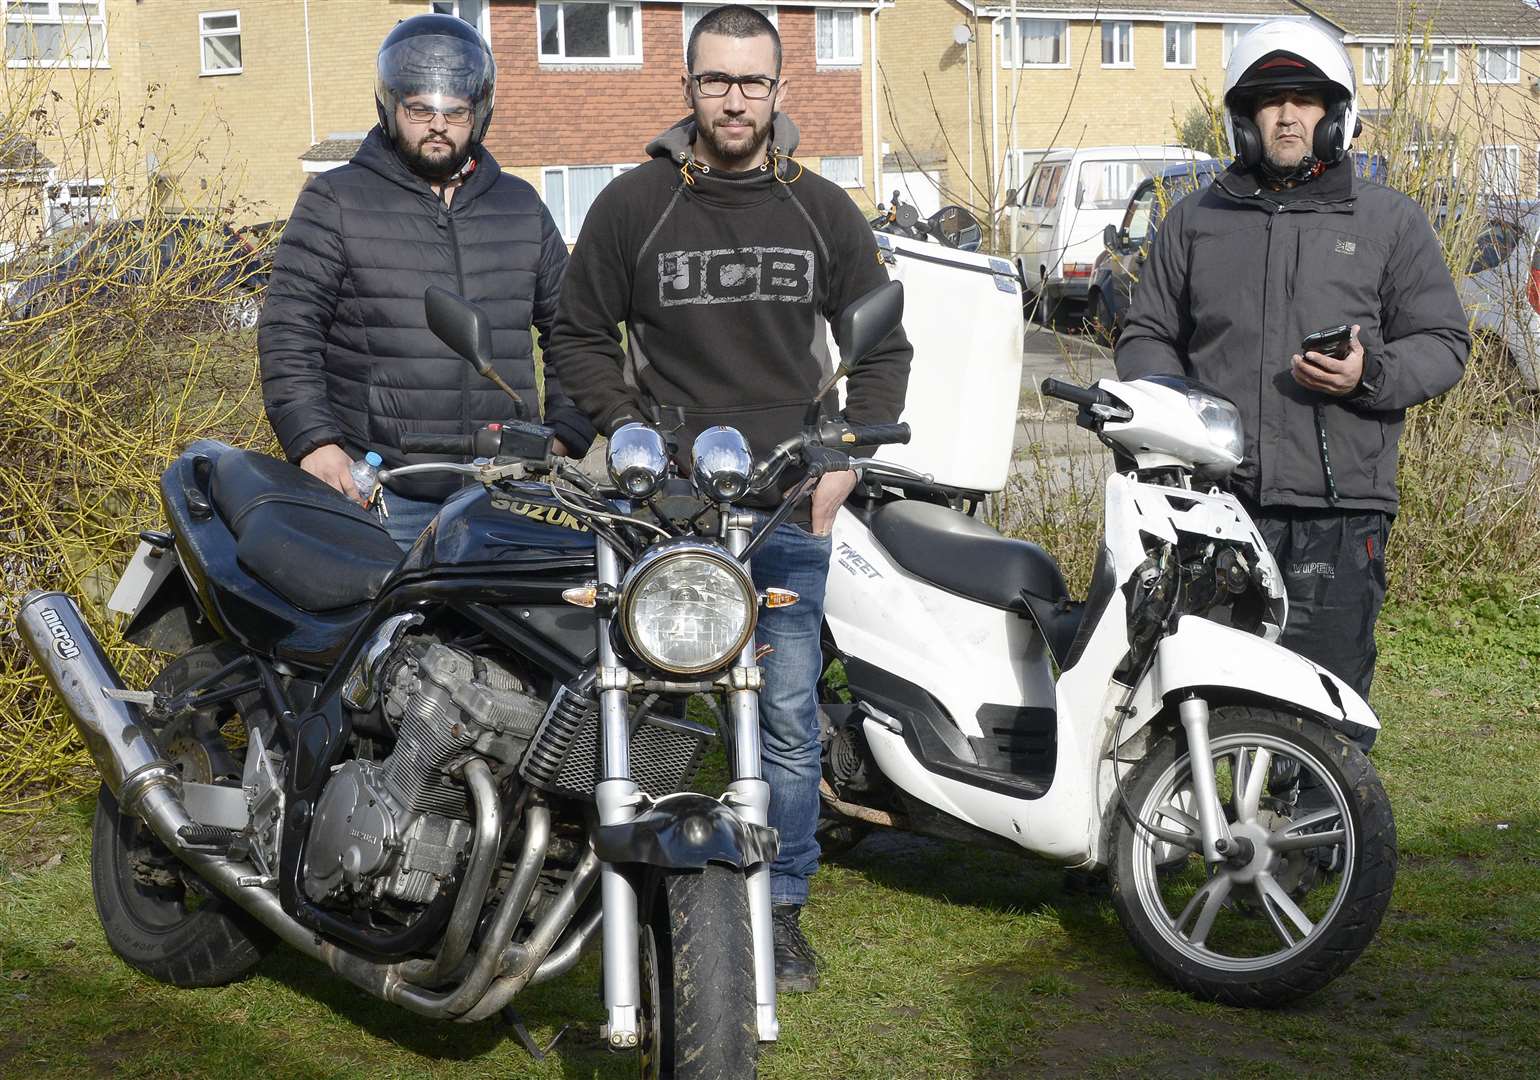 Mauro Borges with his two stolen bikes and fellow bikers Emmerson Machado and Rodlfo Ribeiro, who also had motorcycles stolen